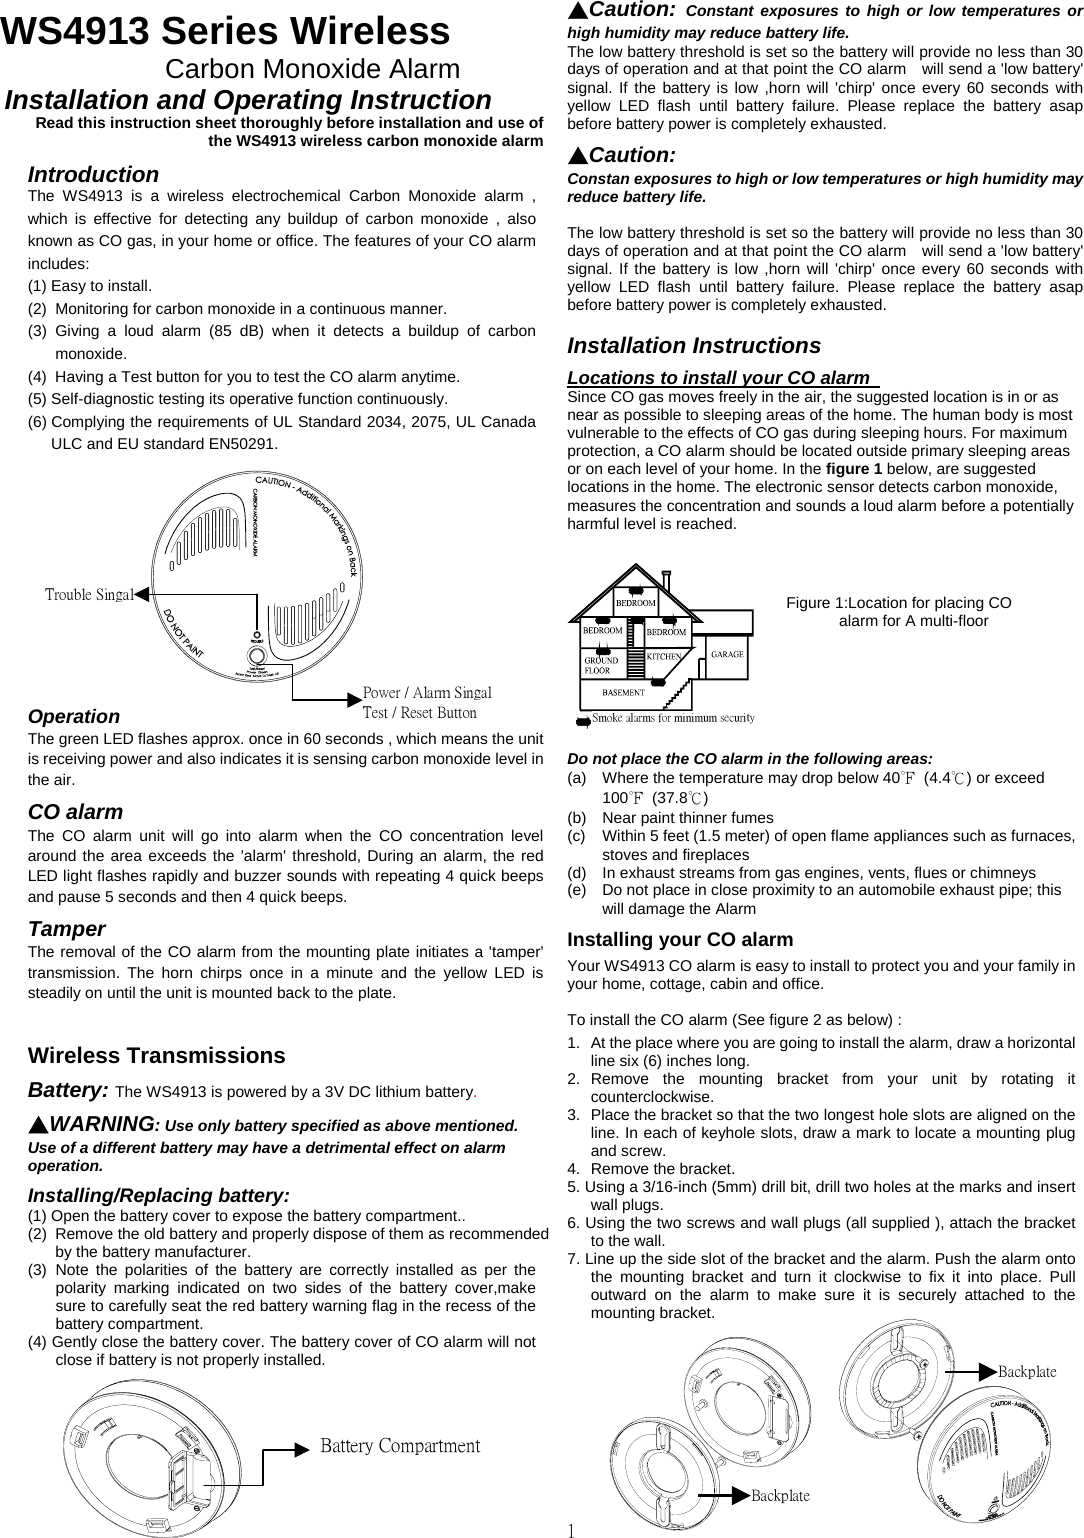                               1  WS4913 Series Wireless   Carbon Monoxide Alarm     Installation and Operating Instruction       Read this instruction sheet thoroughly before installation and use of the WS4913 wireless carbon monoxide alarm   Introduction The WS4913 is a wireless electrochemical Carbon Monoxide alarm , which is effective for detecting any buildup of carbon monoxide , also known as CO gas, in your home or office. The features of your CO alarm includes: (1) Easy to install. (2)  Monitoring for carbon monoxide in a continuous manner. (3) Giving a loud alarm (85 dB) when it detects a buildup of carbon monoxide. (4)  Having a Test button for you to test the CO alarm anytime. (5) Self-diagnostic testing its operative function continuously. (6) Complying the requirements of UL Standard 2034, 2075, UL Canada ULC and EU standard EN50291.       Operation  The green LED flashes approx. once in 60 seconds , which means the unit is receiving power and also indicates it is sensing carbon monoxide level in the air. CO alarm   The CO alarm unit will go into alarm when the CO concentration level around the area exceeds the &apos;alarm&apos; threshold, During an alarm, the red LED light flashes rapidly and buzzer sounds with repeating 4 quick beeps and pause 5 seconds and then 4 quick beeps.   Tamper  The removal of the CO alarm from the mounting plate initiates a &apos;tamper&apos; transmission. The horn chirps once in a minute and the yellow LED is steadily on until the unit is mounted back to the plate.    Wireless Transmissions  Battery: The WS4913 is powered by a 3V DC lithium battery.   ▲WARNING: Use only battery specified as above mentioned. Use of a different battery may have a detrimental effect on alarm operation.   Installing/Replacing battery: (1) Open the battery cover to expose the battery compartment.. (2)  Remove the old battery and properly dispose of them as recommended by the battery manufacturer. (3) Note the polarities of the battery are correctly installed as per the polarity marking indicated on two sides of the battery cover,make sure to carefully seat the red battery warning flag in the recess of the battery compartment. (4) Gently close the battery cover. The battery cover of CO alarm will not close if battery is not properly installed.     ▲Caution:  Constant exposures to high or low temperatures or high humidity may reduce battery life.   The low battery threshold is set so the battery will provide no less than 30 days of operation and at that point the CO alarm    will send a &apos;low battery&apos; signal. If the battery is low ,horn will &apos;chirp&apos; once every 60 seconds with yellow LED flash until battery failure. Please replace the battery asap before battery power is completely exhausted.     ▲Caution:  Constan exposures to high or low temperatures or high humidity may reduce battery life.    The low battery threshold is set so the battery will provide no less than 30 days of operation and at that point the CO alarm    will send a &apos;low battery&apos; signal. If the battery is low ,horn will &apos;chirp&apos; once every 60 seconds with yellow LED flash until battery failure. Please replace the battery asap before battery power is completely exhausted.    Installation Instructions   Locations to install your CO alarm   Since CO gas moves freely in the air, the suggested location is in or as near as possible to sleeping areas of the home. The human body is most vulnerable to the effects of CO gas during sleeping hours. For maximum protection, a CO alarm should be located outside primary sleeping areas or on each level of your home. In the figure 1 below, are suggested locations in the home. The electronic sensor detects carbon monoxide, measures the concentration and sounds a loud alarm before a potentially harmful level is reached.     Do not place the CO alarm in the following areas: (a)  Where the temperature may drop below 40℉ (4.4℃) or exceed   100℉ (37.8℃) (b)  Near paint thinner fumes (c)  Within 5 feet (1.5 meter) of open flame appliances such as furnaces, stoves and fireplaces (d)  In exhaust streams from gas engines, vents, flues or chimneys (e)  Do not place in close proximity to an automobile exhaust pipe; this will damage the Alarm  Installing your CO alarm   Your WS4913 CO alarm is easy to install to protect you and your family in your home, cottage, cabin and office.    To install the CO alarm (See figure 2 as below) :  1.  At the place where you are going to install the alarm, draw a horizontal line six (6) inches long. 2. Remove the mounting bracket from your unit by rotating it counterclockwise. 3.  Place the bracket so that the two longest hole slots are aligned on the line. In each of keyhole slots, draw a mark to locate a mounting plug and screw. 4.  Remove the bracket. 5. Using a 3/16-inch (5mm) drill bit, drill two holes at the marks and insert wall plugs. 6. Using the two screws and wall plugs (all supplied ), attach the bracket to the wall.   7. Line up the side slot of the bracket and the alarm. Push the alarm onto the mounting bracket and turn it clockwise to fix it into place. Pull outward on the alarm to make sure it is securely attached to the mounting bracket.          Trouble SingalPower / Alarm SingalTest / Reset Button Battery CompartmentSmoke alarms for minimum securityFigure 1:Location for placing CO alarm for A multi-floor        Backplate Backplate 